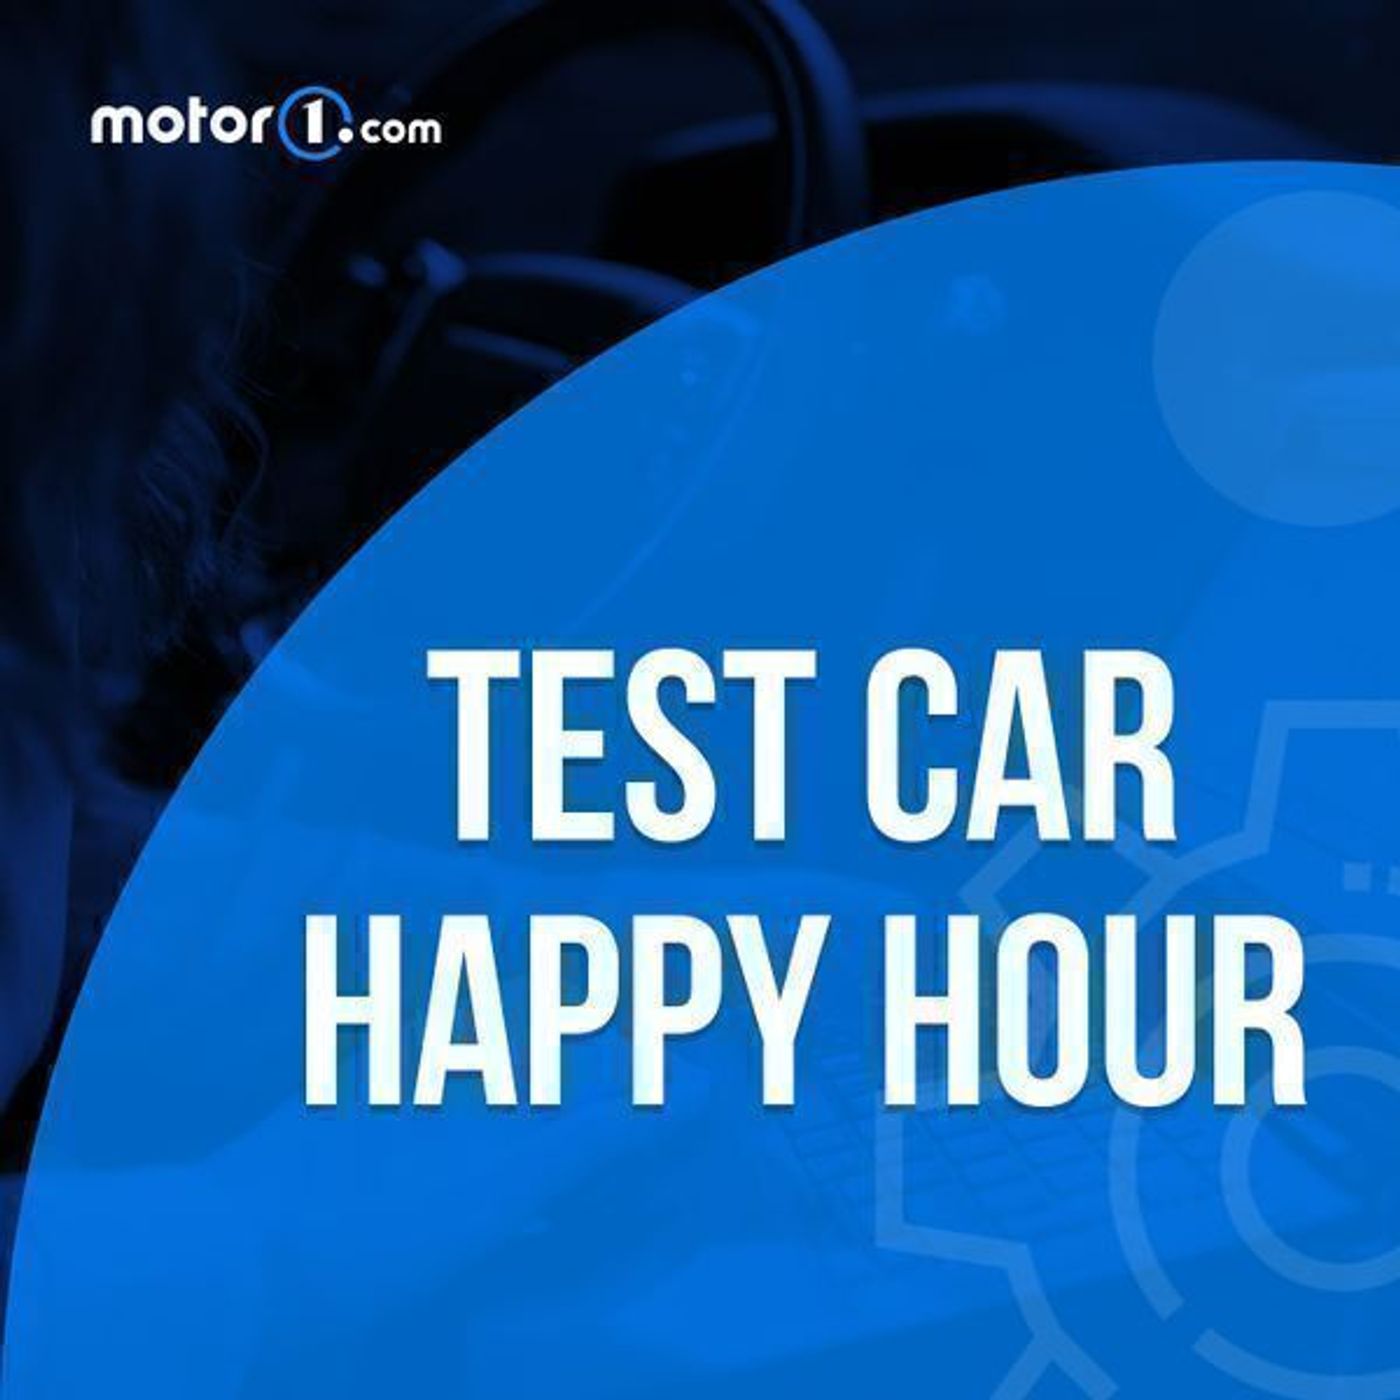 S1 Ep56: Motor1 Test Car Happy Hour #56: The Best and Worst Cars We've Driven This Year (So Far)